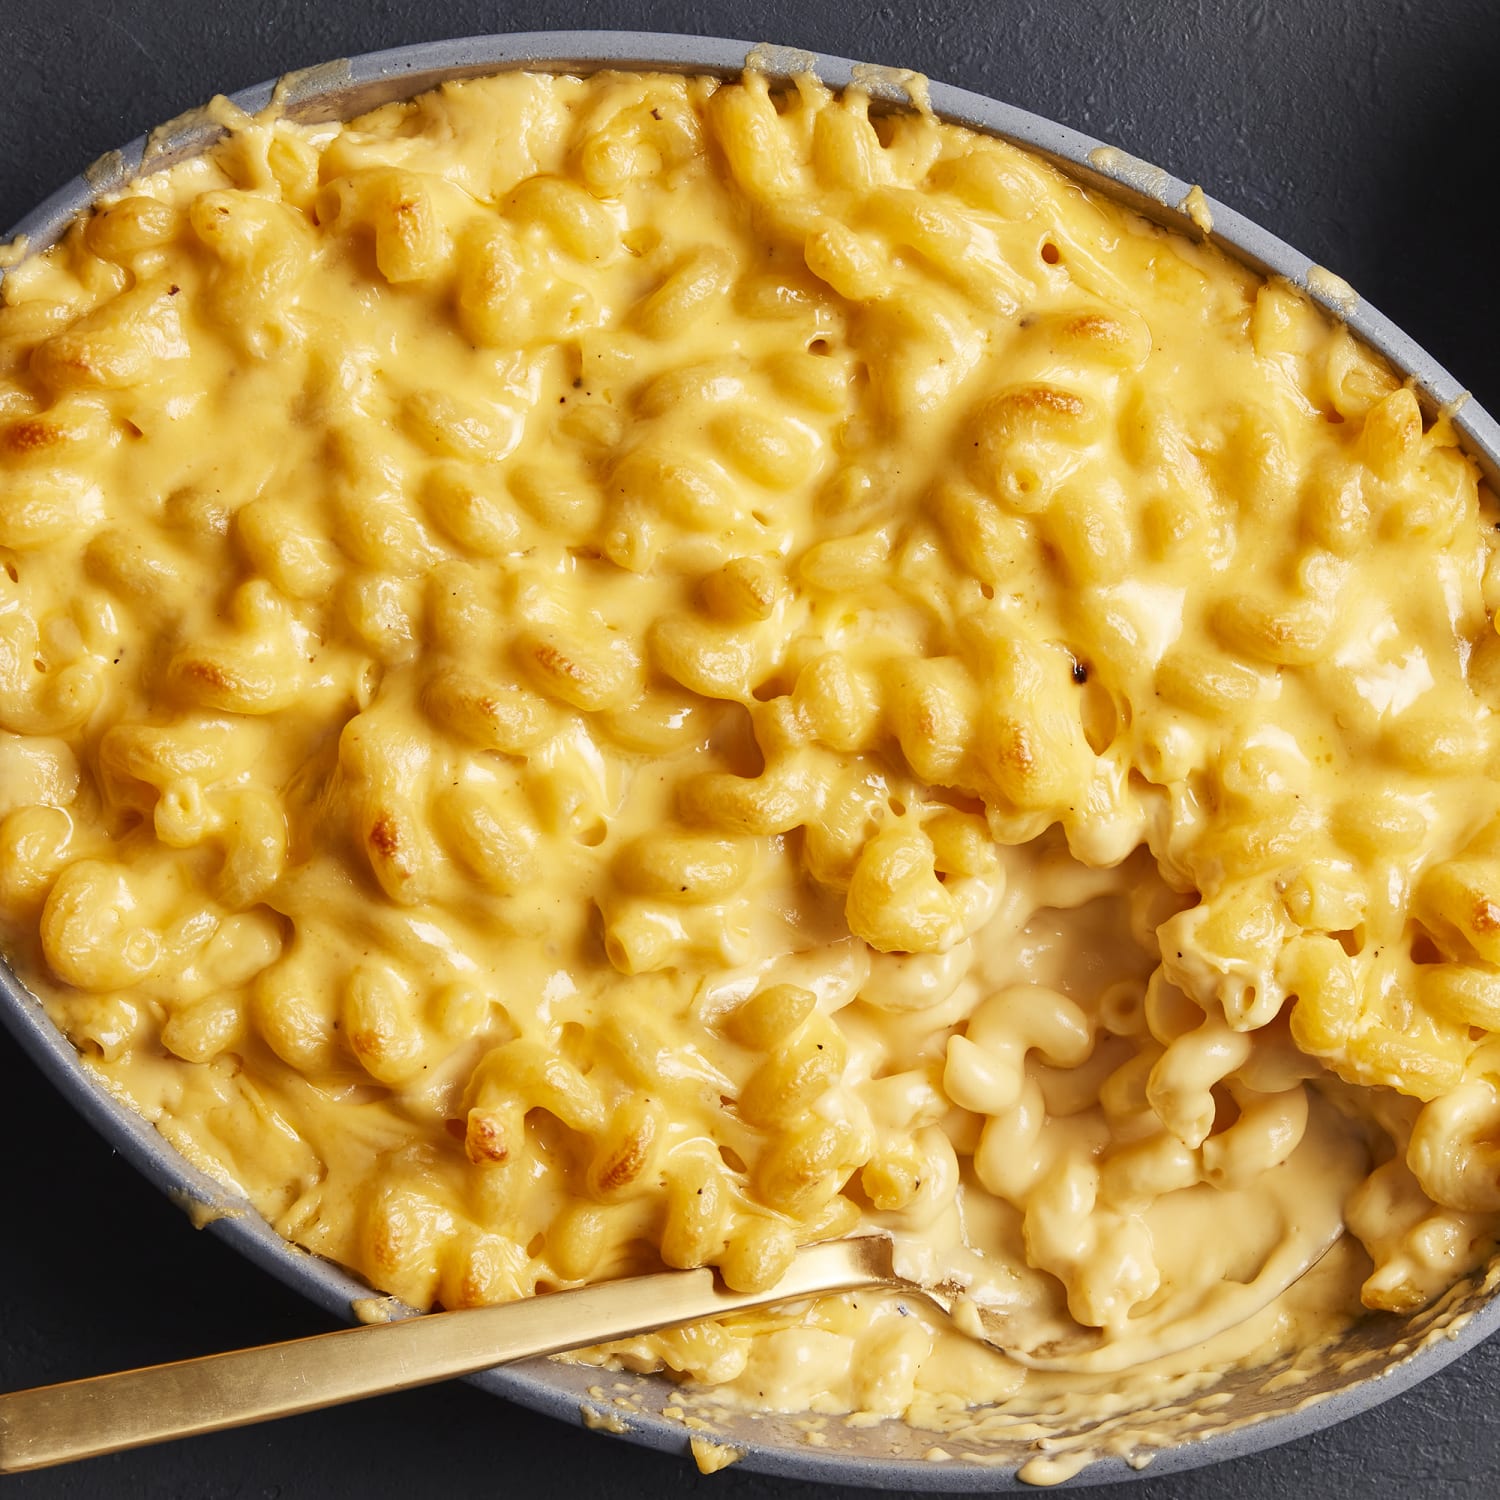 Before You Make the Thanksgiving Mac and Cheese, Add This